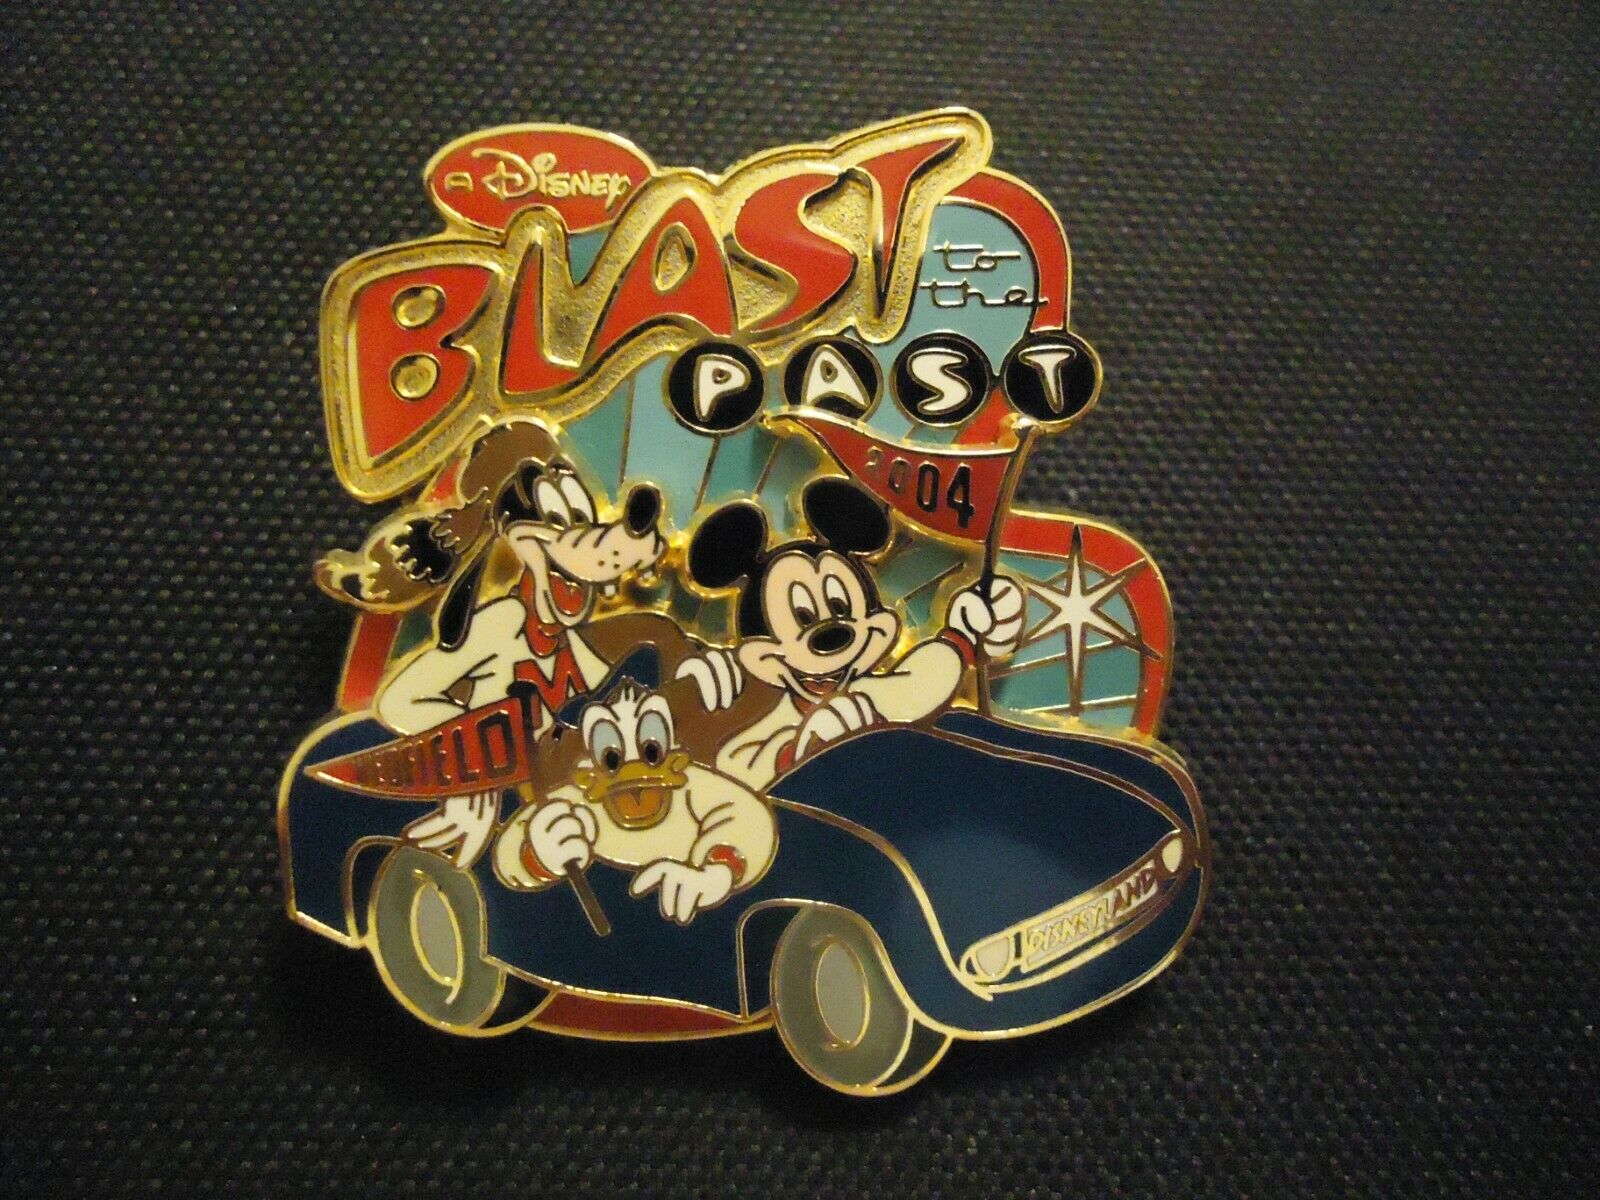 DISNEY WDAC/WDCC 2004 BLAST TO THE PAST LOGO GET PINNED MICKEY GOOFY PIN LE 1000